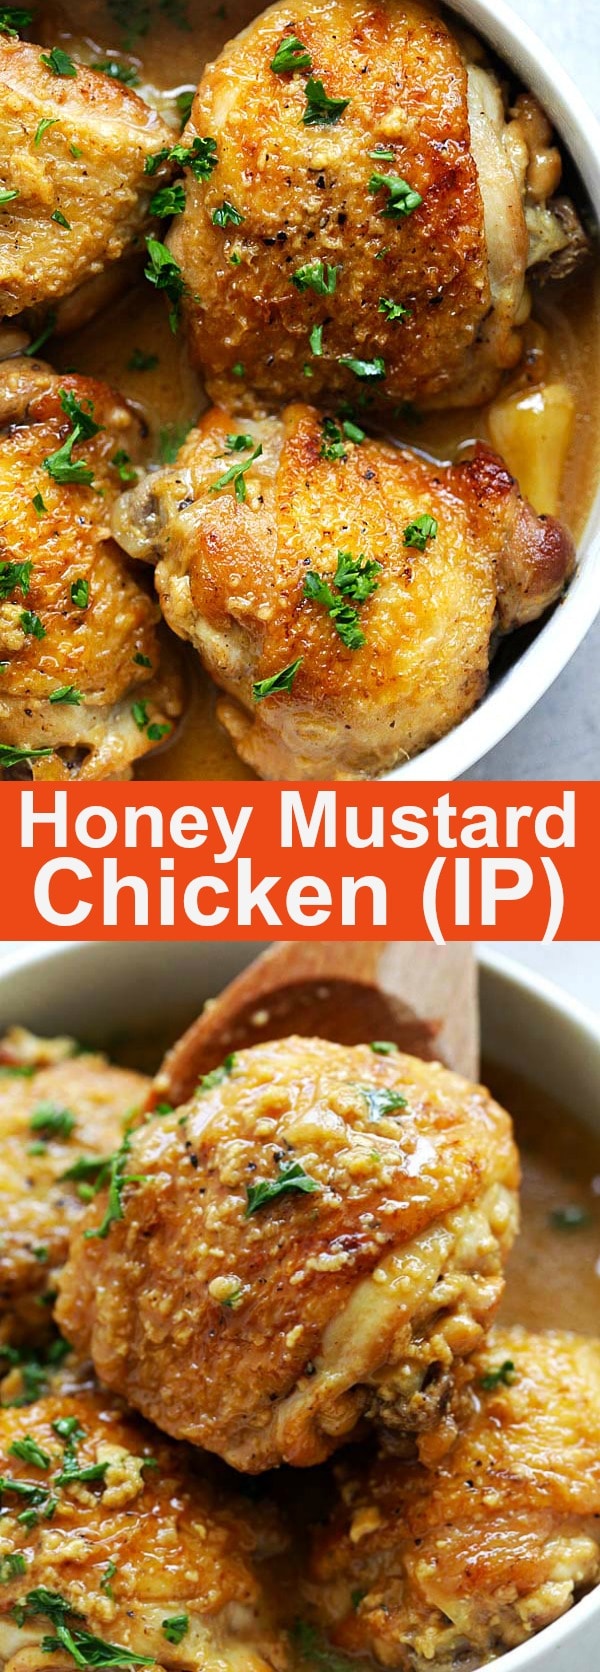 Honey Mustard Chicken - tender, juicy and fall-off-the-bone chicken in rich honey mustard sauce. The easiest and most delicious chicken dinner ever | rasamalaysia.com